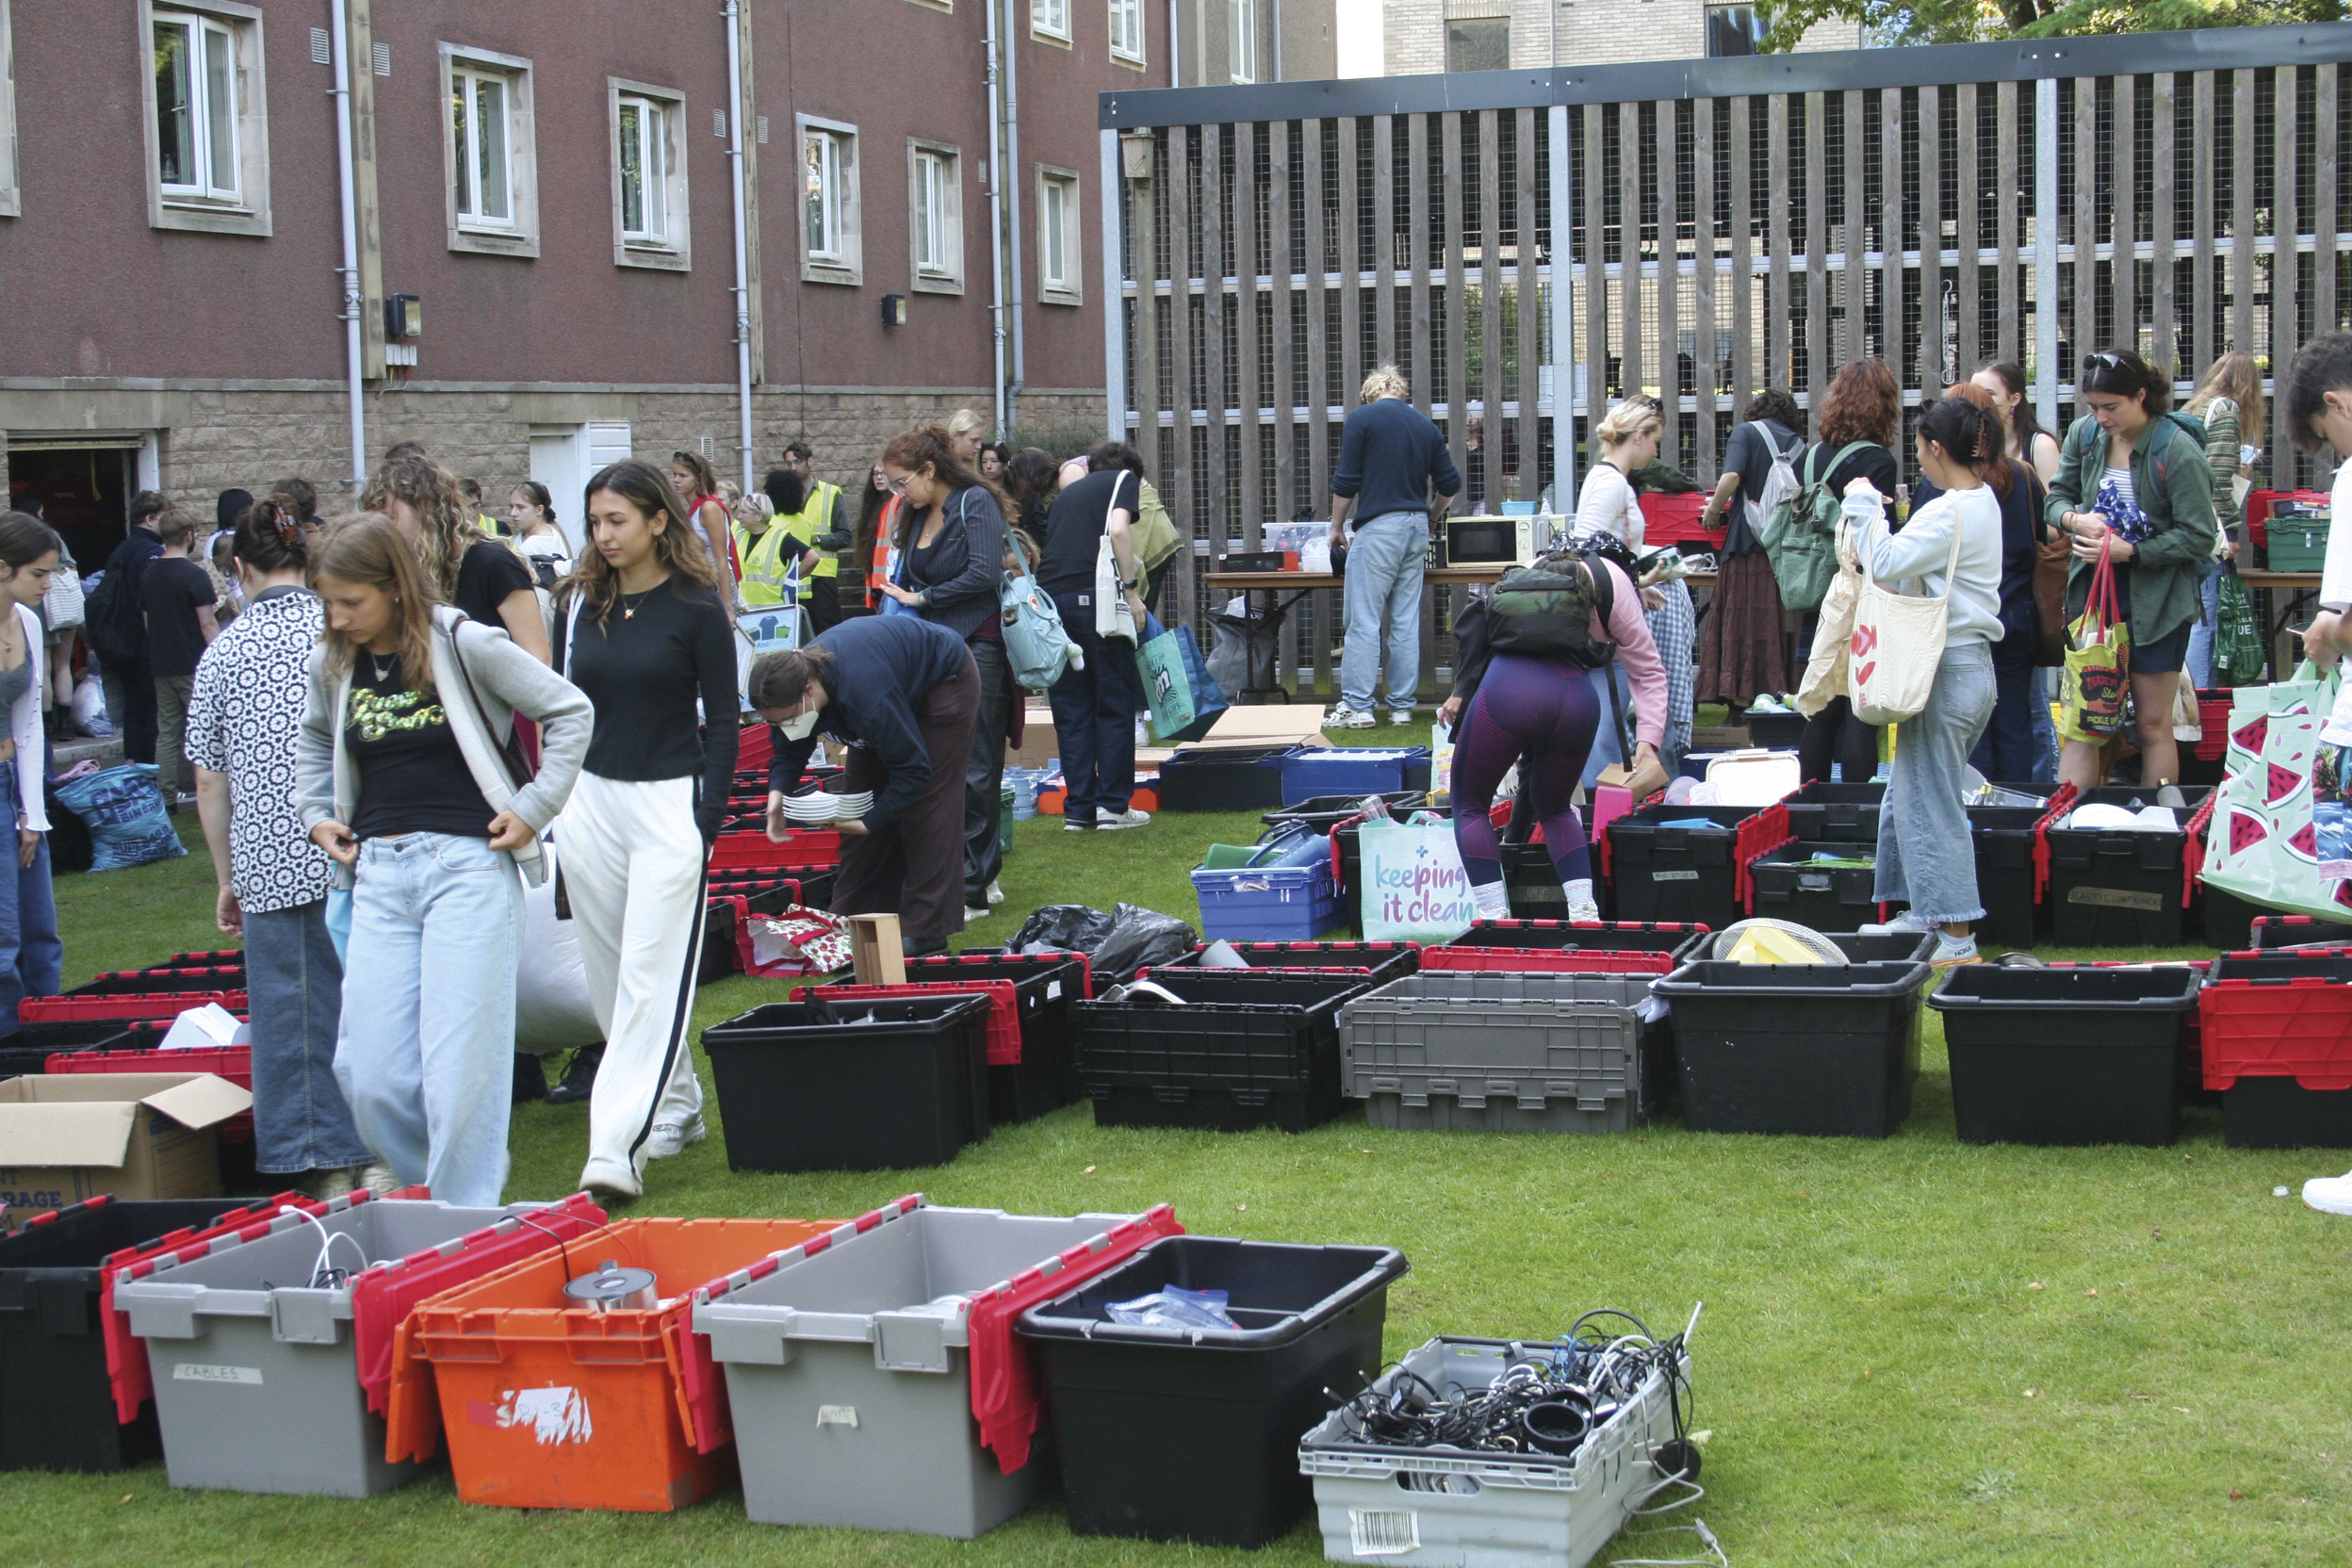 Rows of containers, open to display wares with groups of students rummaging through them.